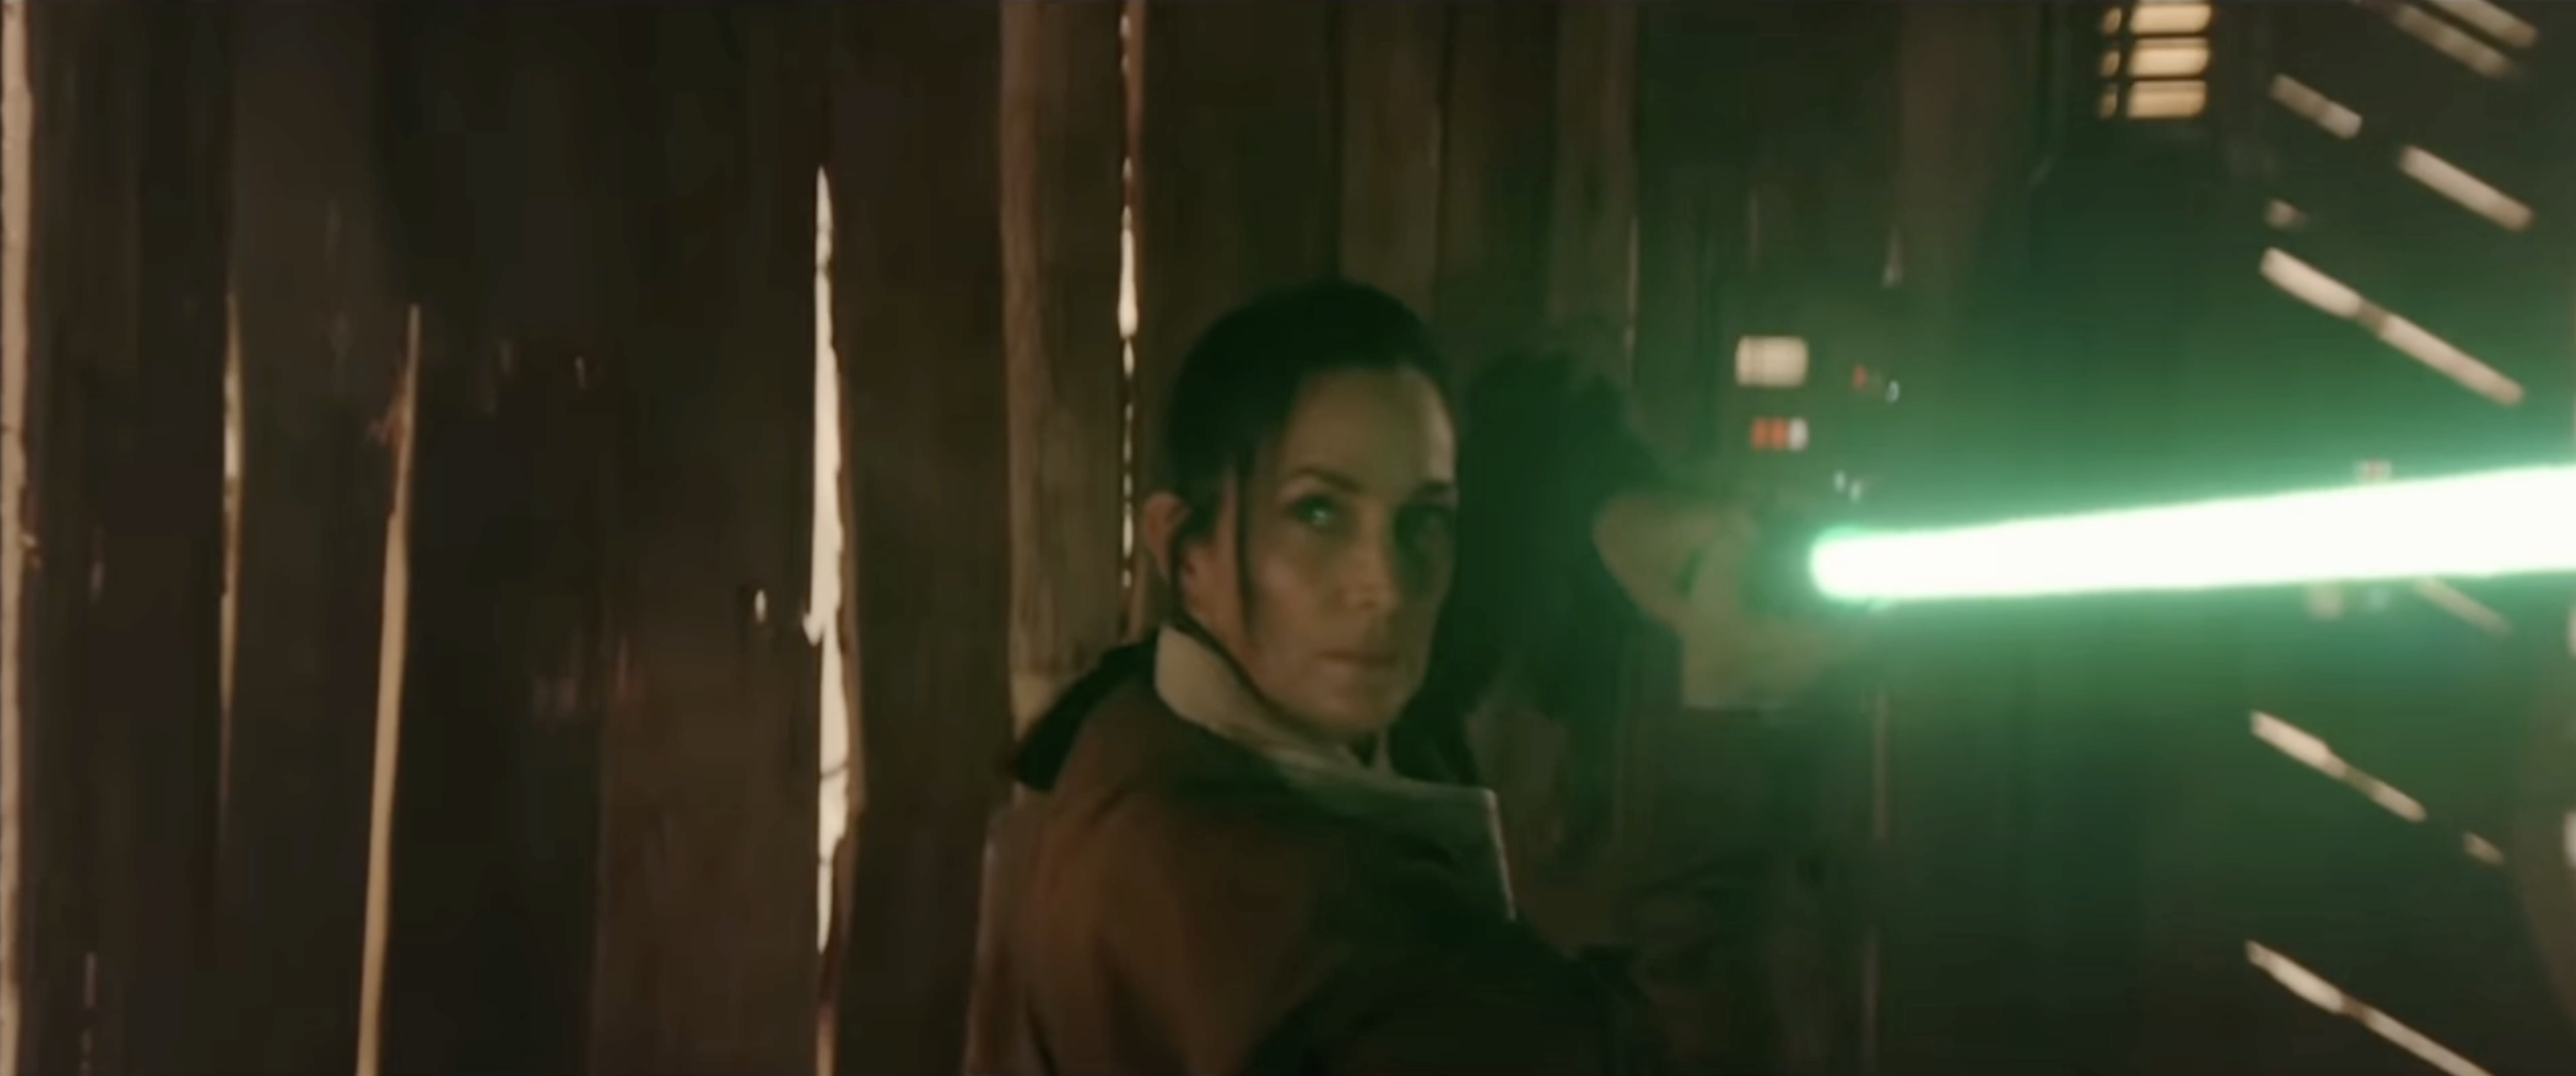 New Trailer For “The Acolyte” Reveals A Mysterious Sith Character